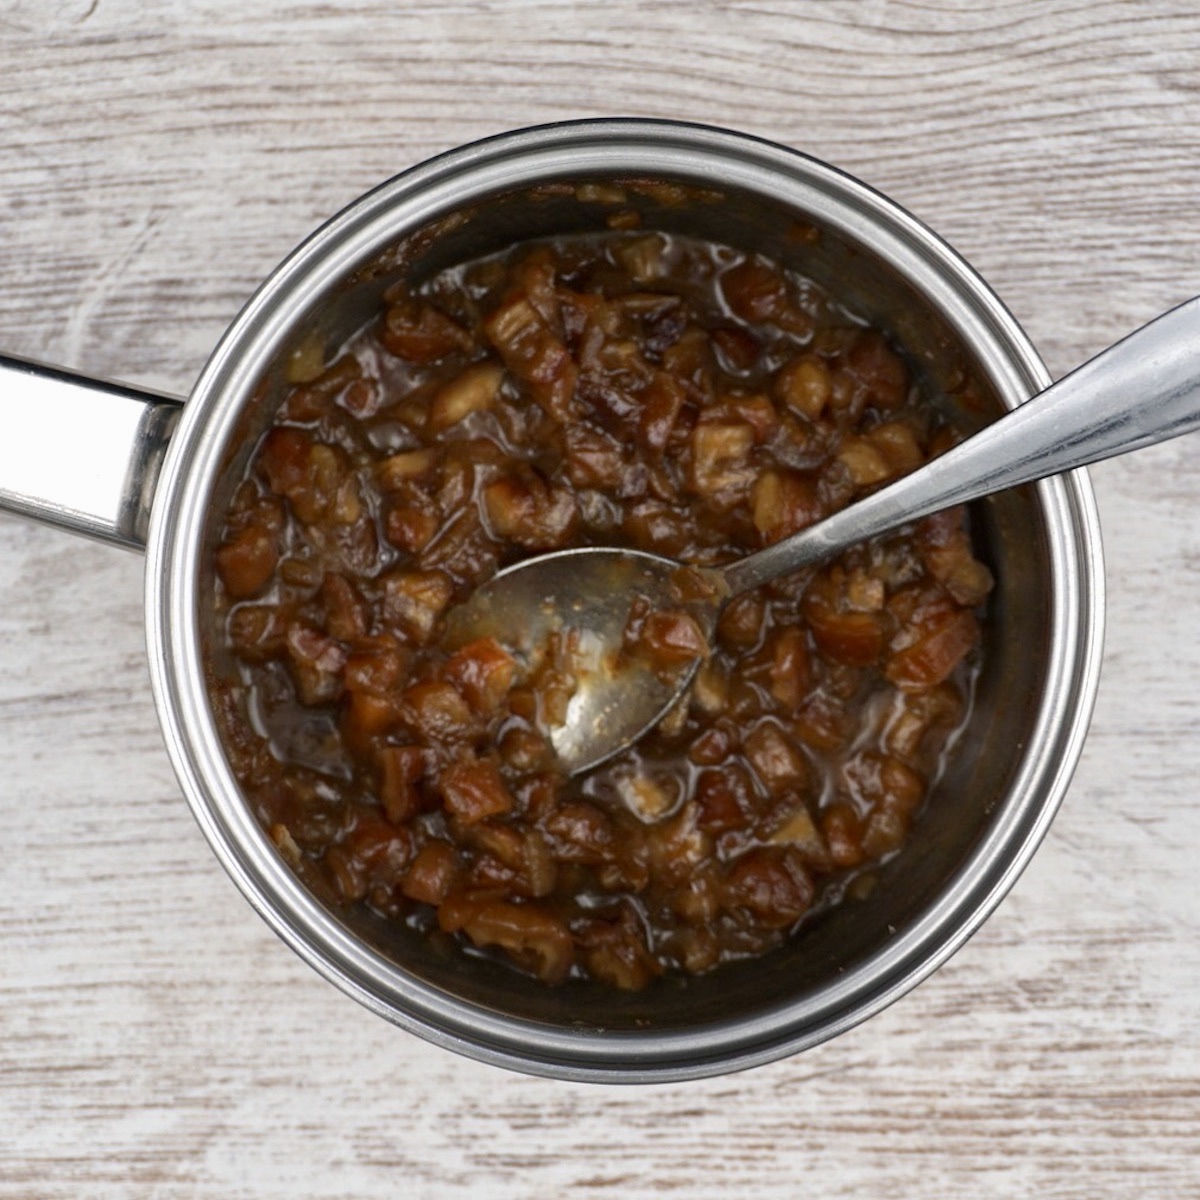 Date paste in a pan with a spoon.